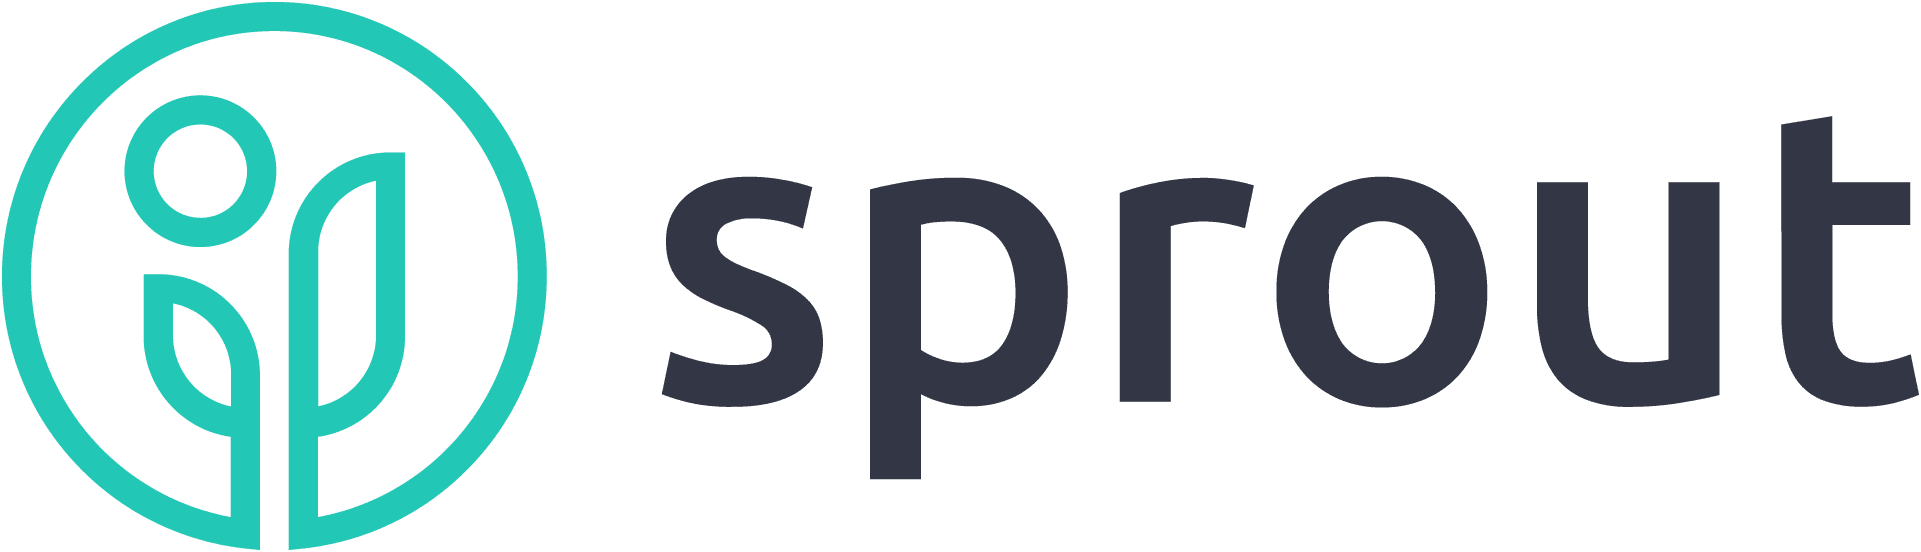 sprout-logo2018-05-31T01_58_16.724Z